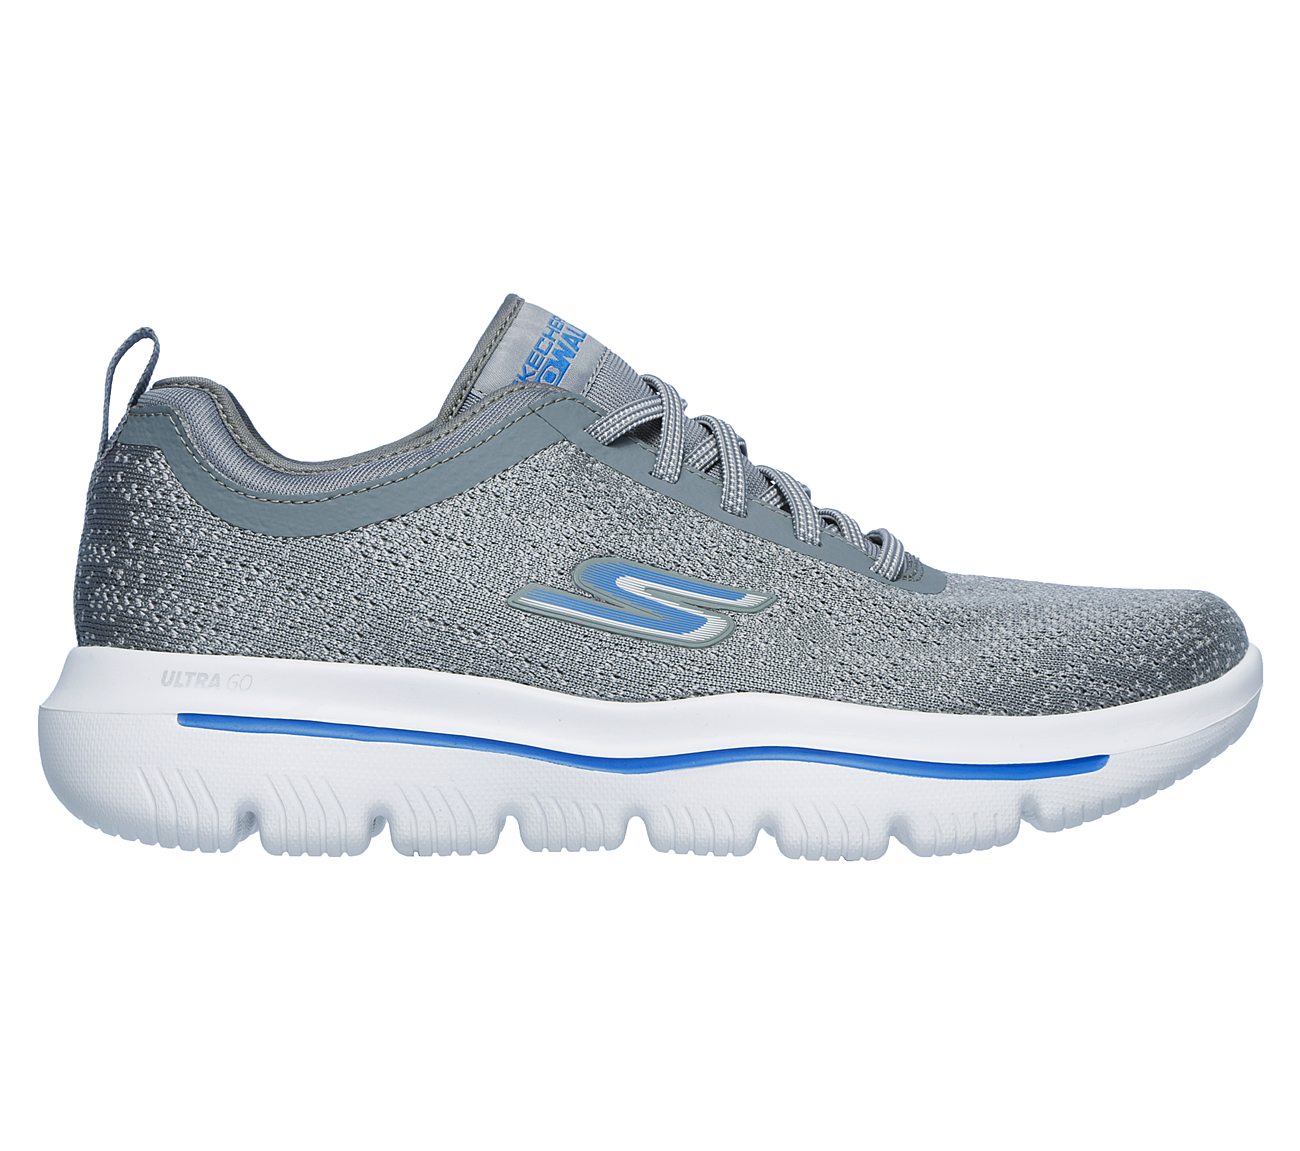 Skechers Grey/Blue Go Walk Evolution Ultra Logic Lace Up Shoes - Style ID: 54740 | India